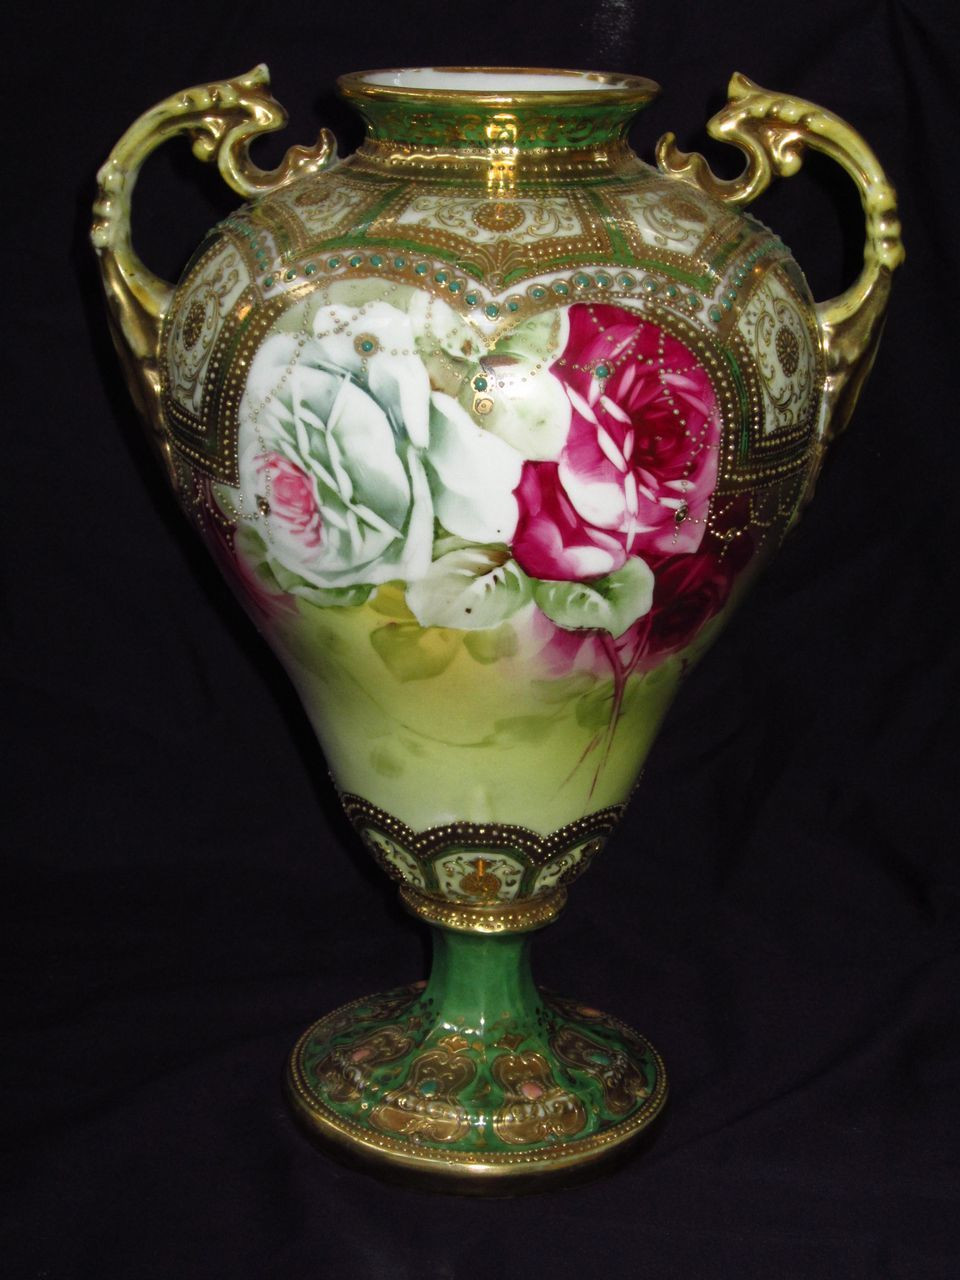 16 Lovely Antique Nippon Vases 2024 free download antique nippon vases of list of synonyms and antonyms of the word nippon vases regarding hand painted footed nippon vase cobalt blue pink roses gold